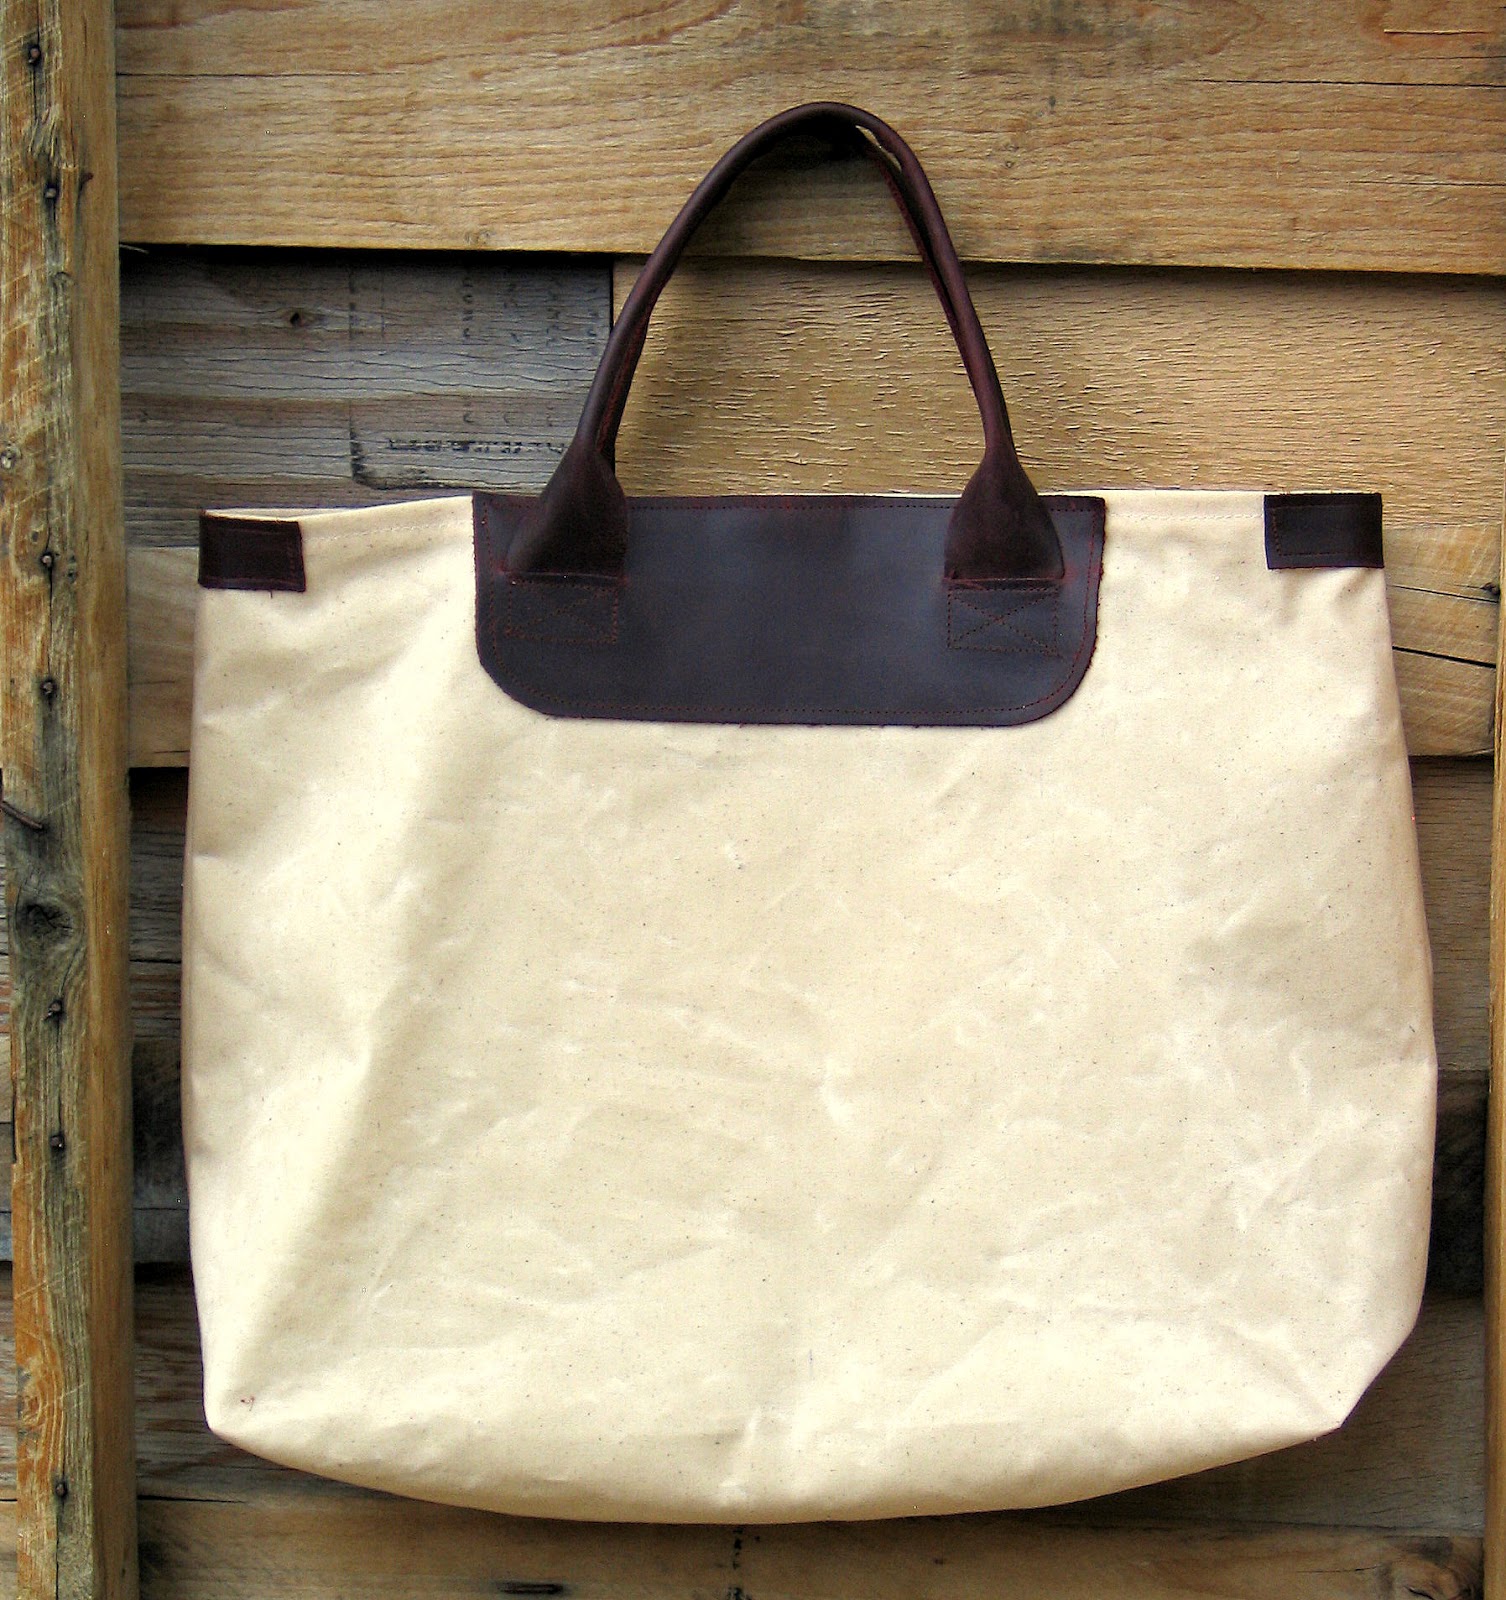 Once upon a bag...: Waxed canvas and leather tote